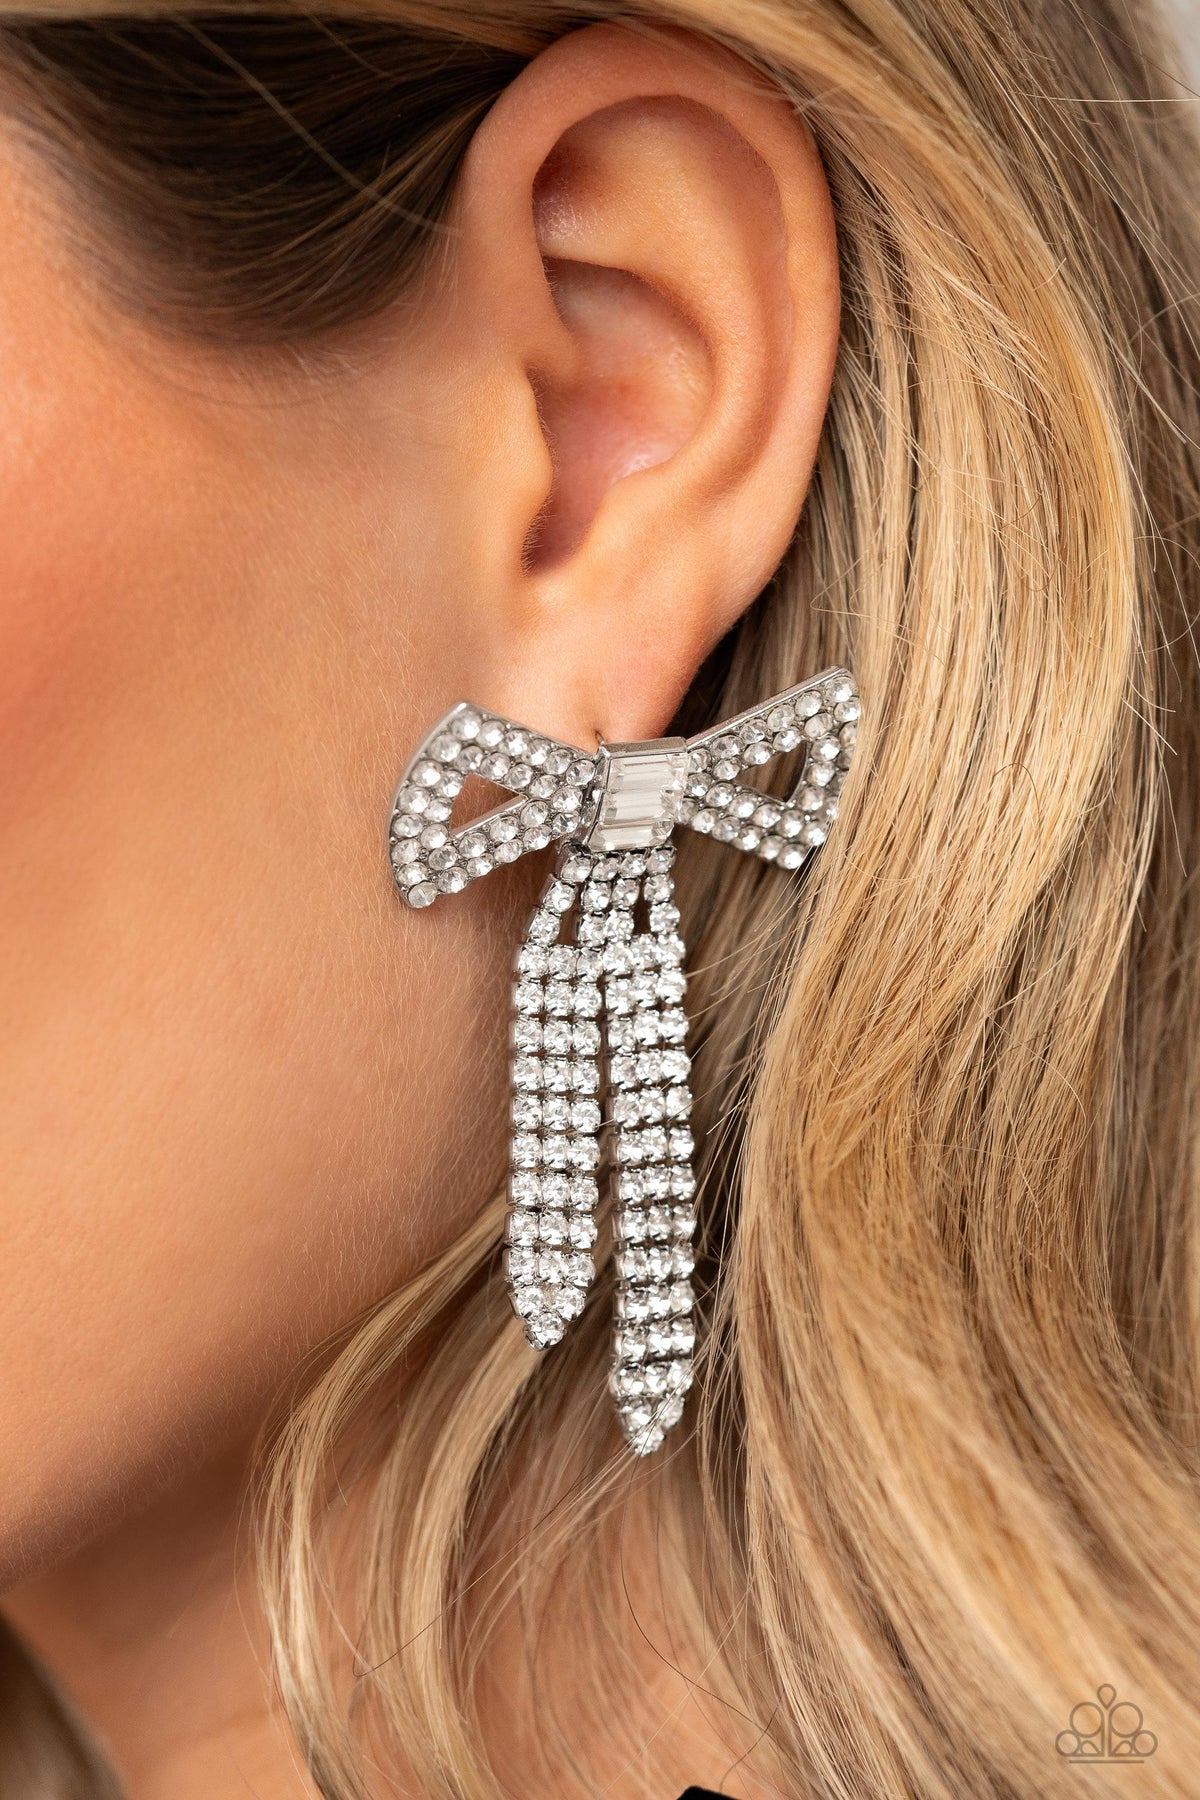 Just BOW With It White Rhinestone Earrings - Paparazzi Accessories-on model - CarasShop.com - $5 Jewelry by Cara Jewels